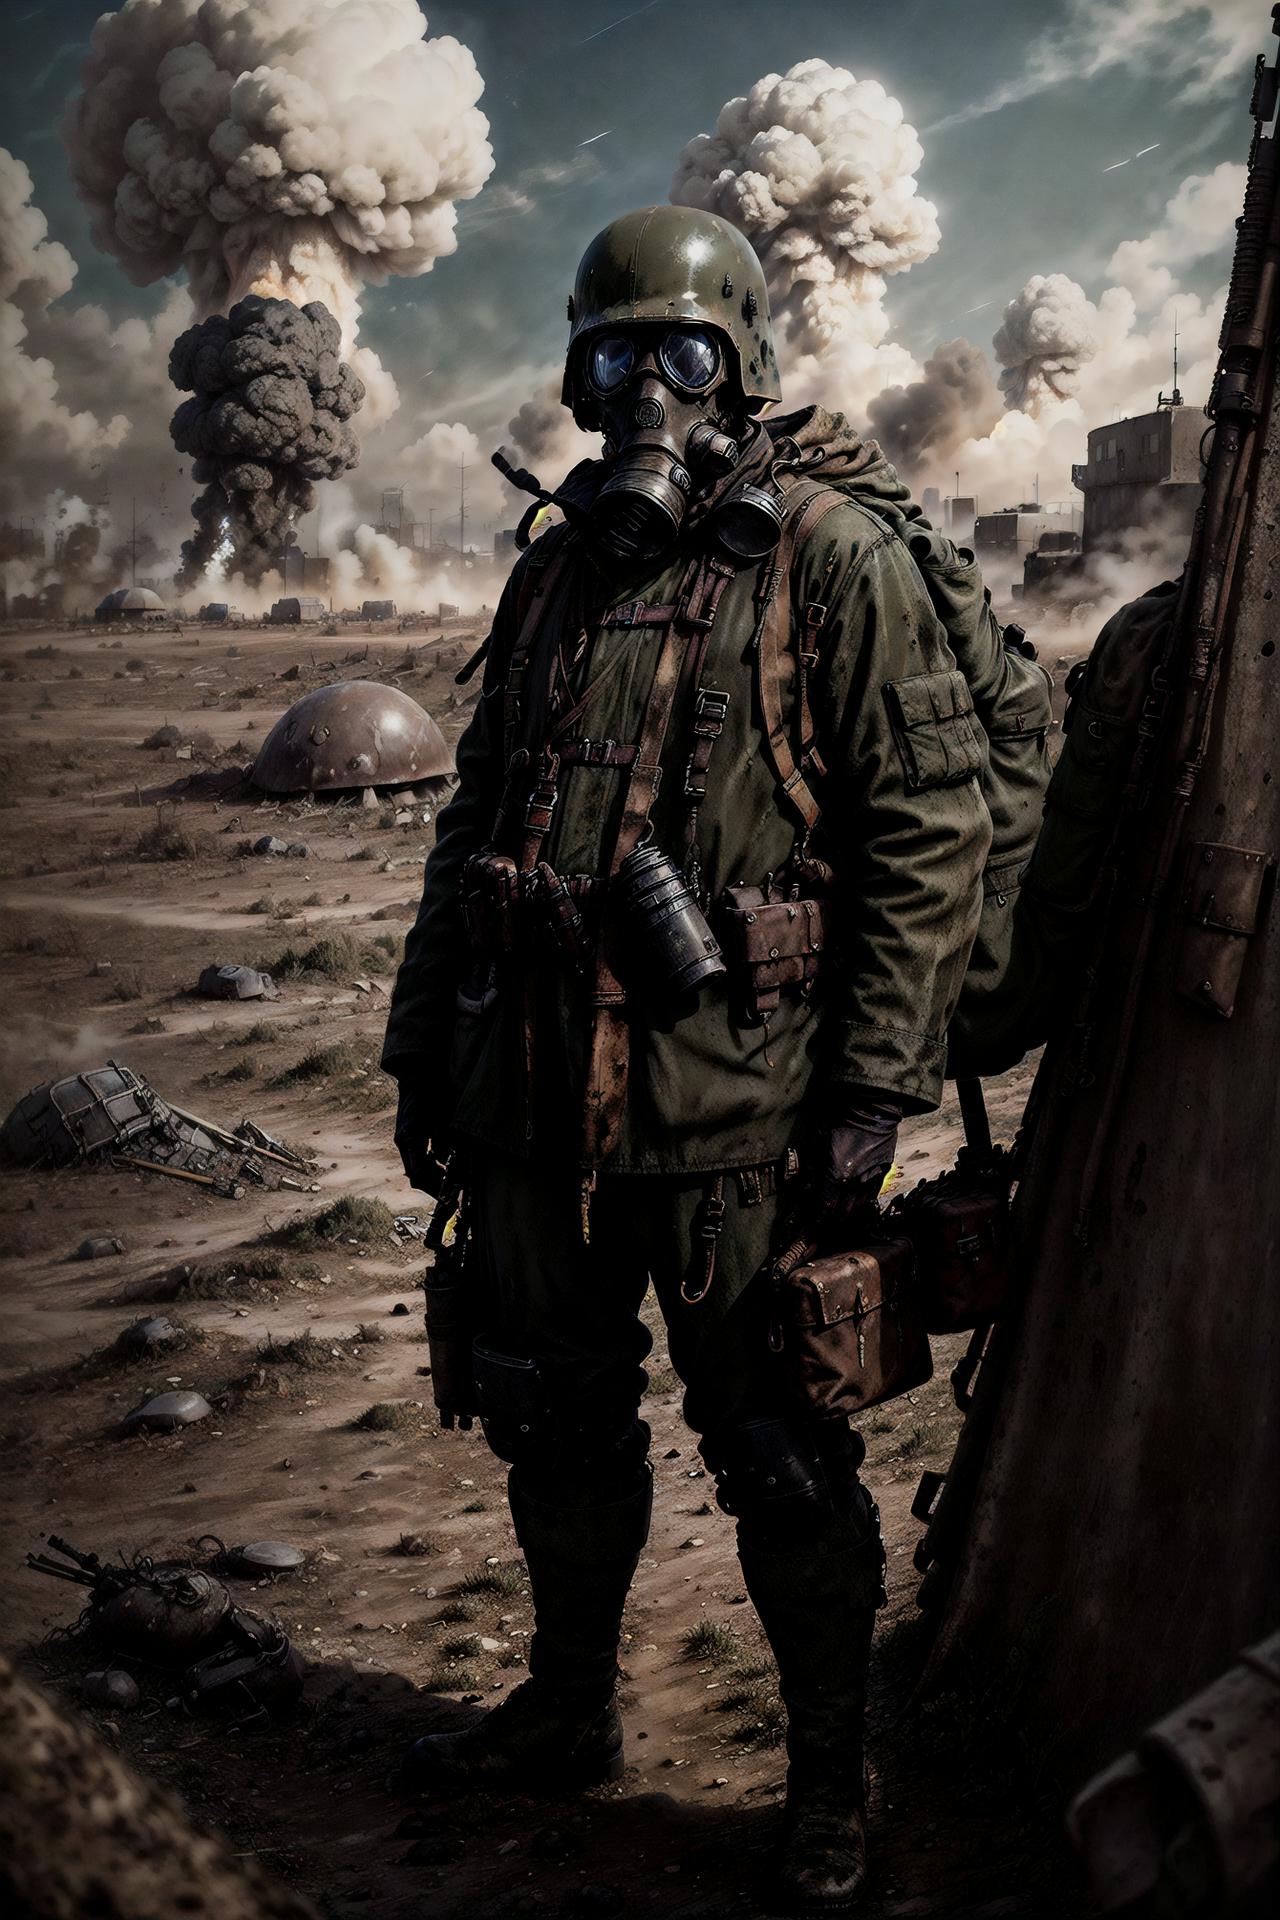 Man in gas mask and uniform holding a canister, standing in a desert setting.